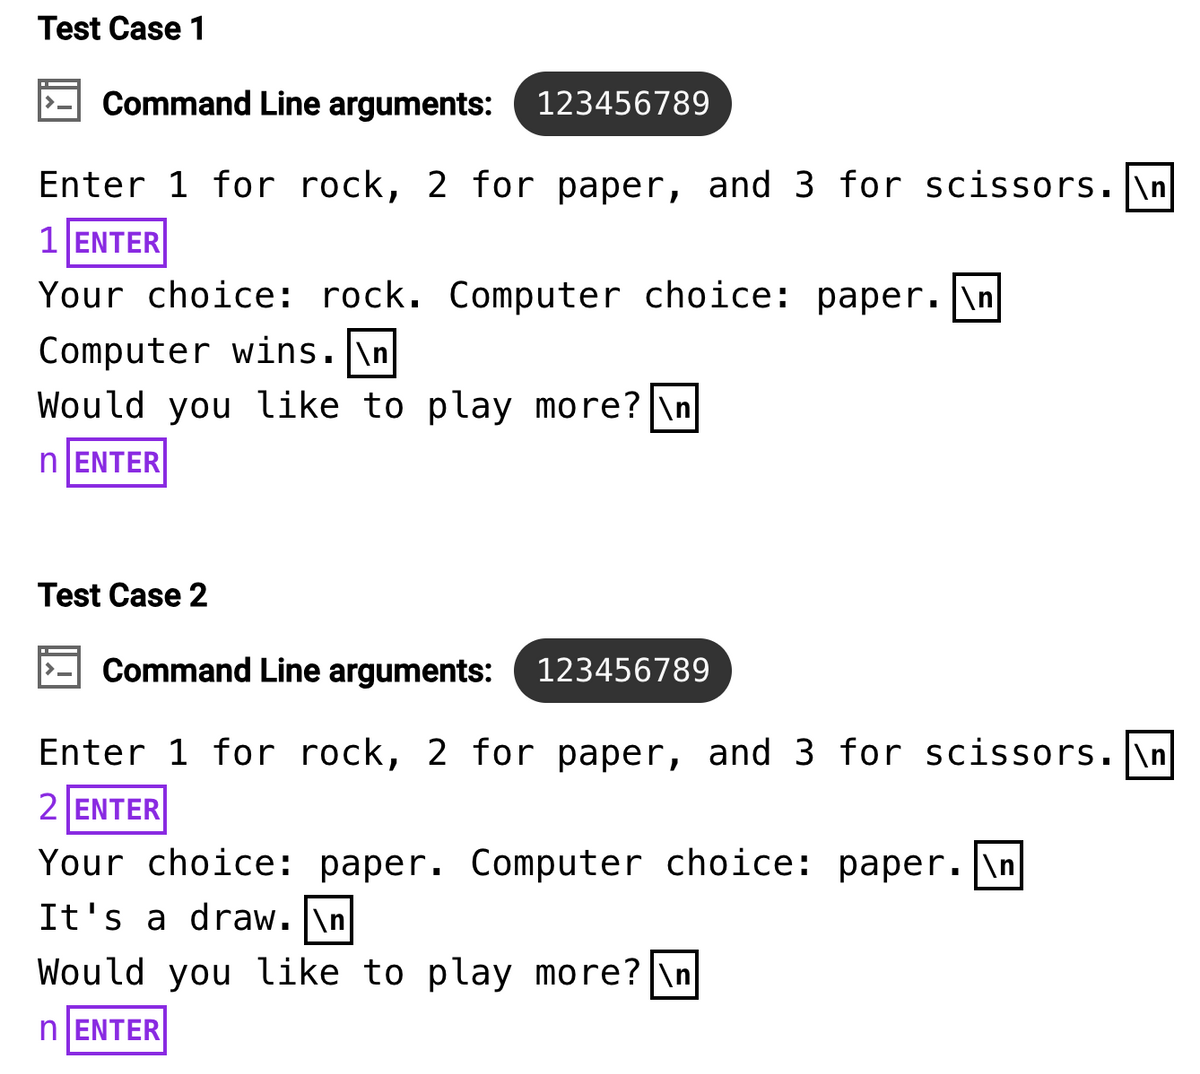 Test Case 1
Command Line arguments: 123456789
Enter 1 for rock, 2 for paper, and 3 for scissors.\n
1 ENTER
Your choice: rock. Computer choice: paper. \n
Computer wins.\n
Would you like to play more? \n
nENTER
Test Case 2
Command Line arguments: 123456789
Enter 1 for rock, 2 for paper, and 3 for scissors. \n
2 ENTER
Your choice: paper. Computer choice: paper. \n
It's a draw. \n
Would you like to play more? \n
n ENTER